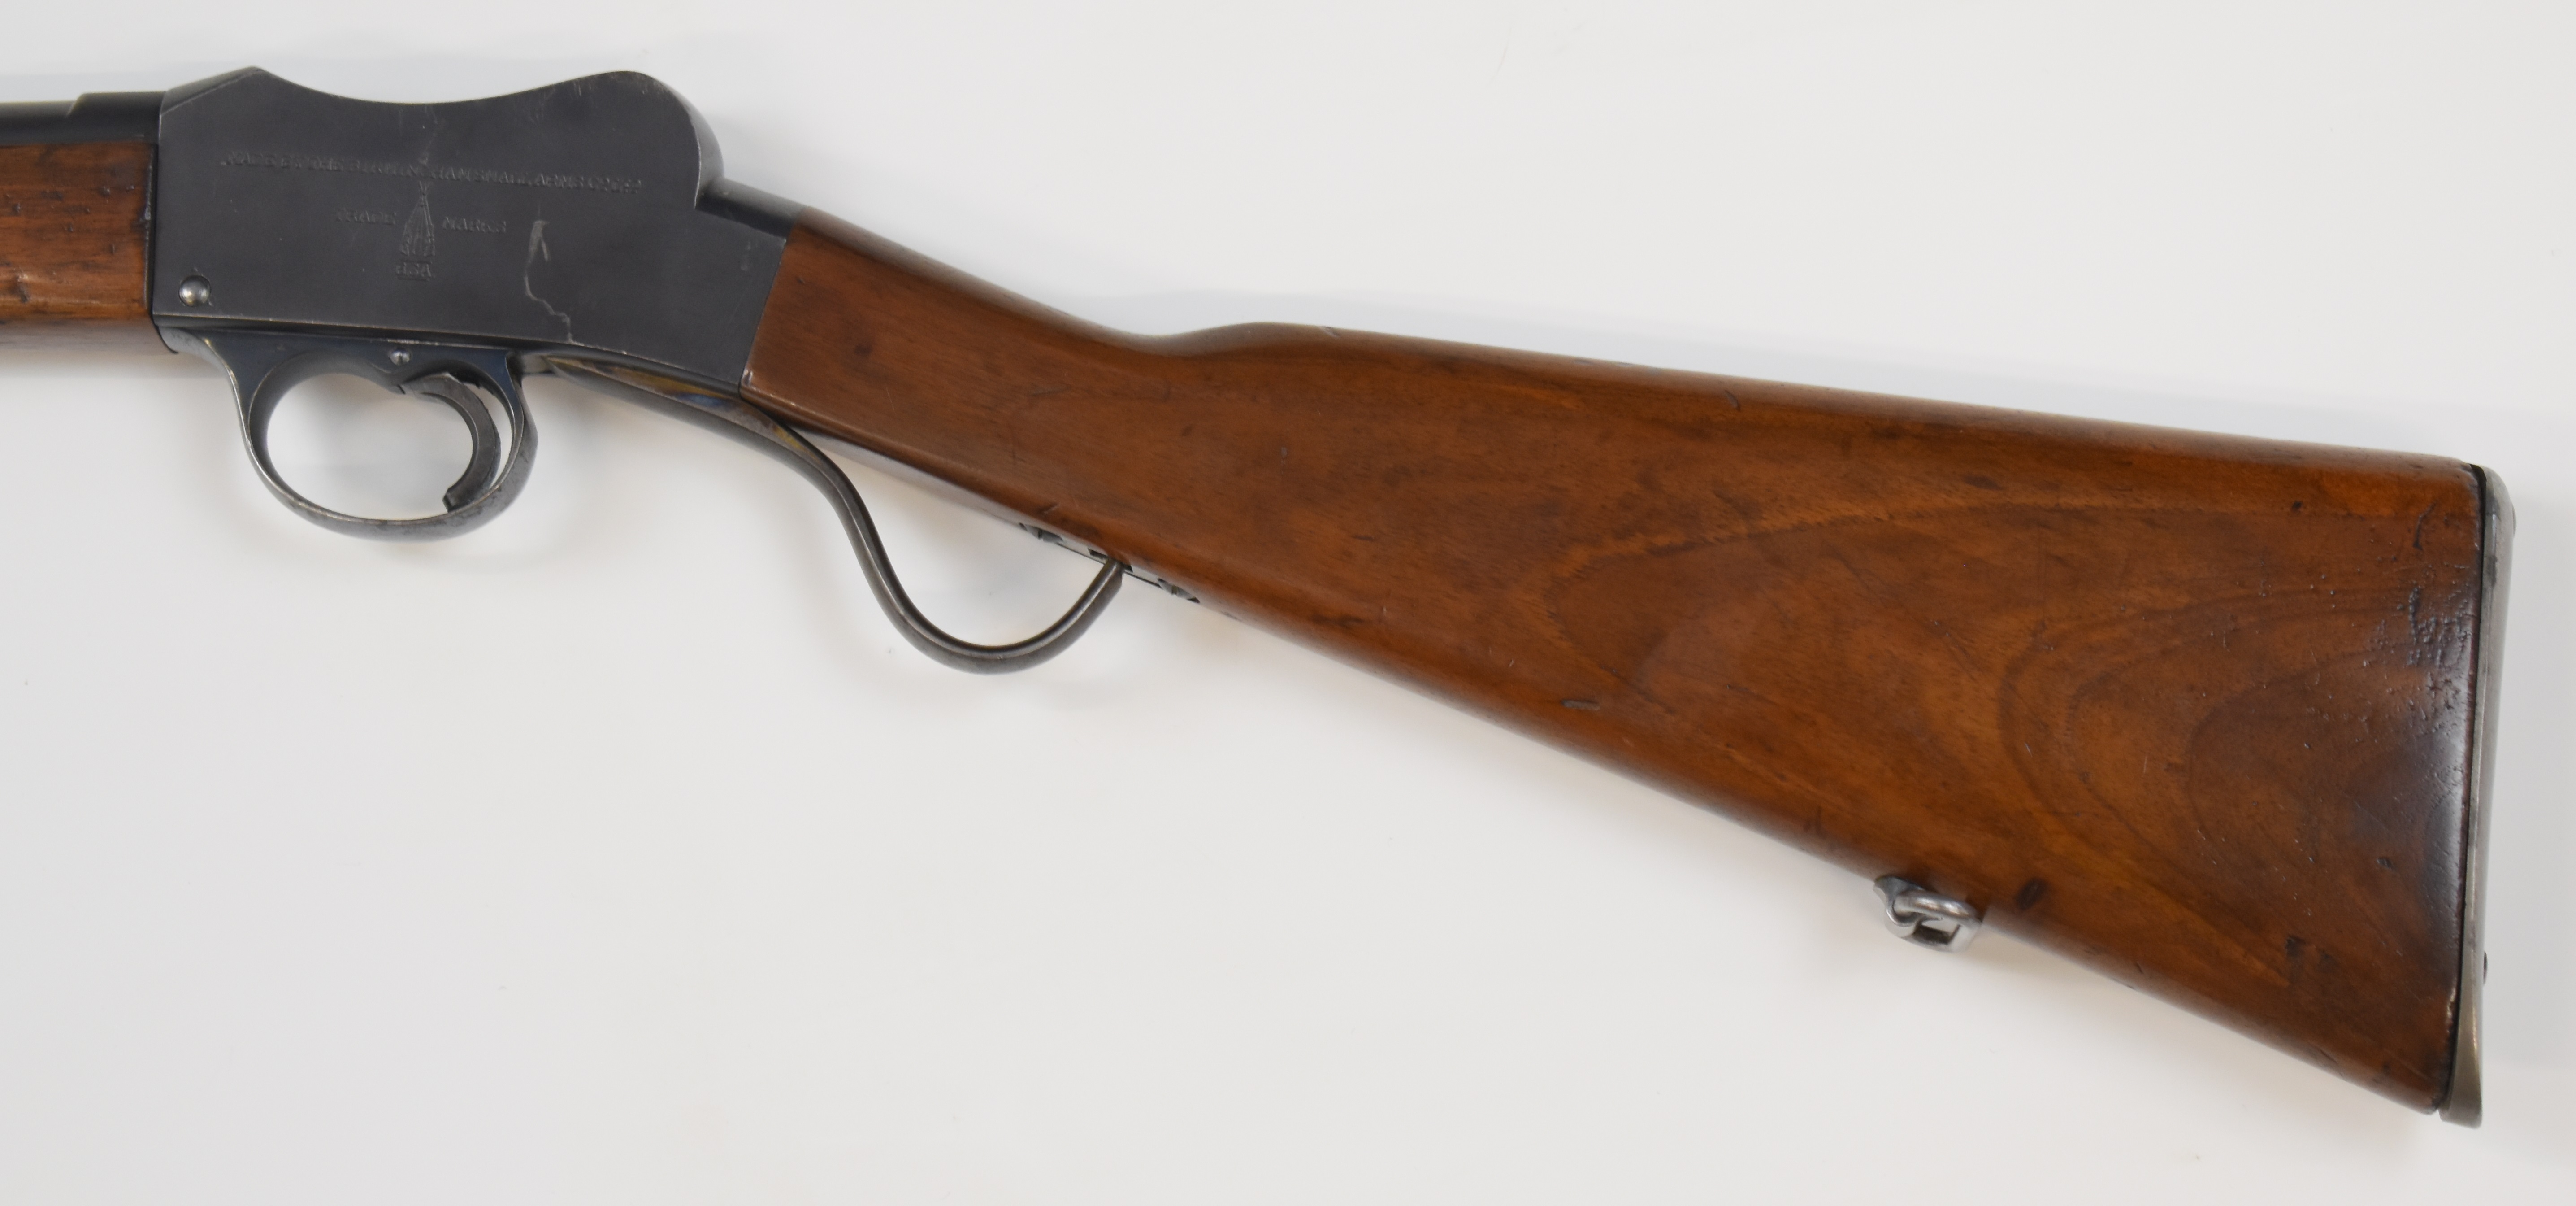 BSA Commonwealth of Australia .310 Cadet Martini underlever-action rifle with adjustable sights, - Image 8 of 10